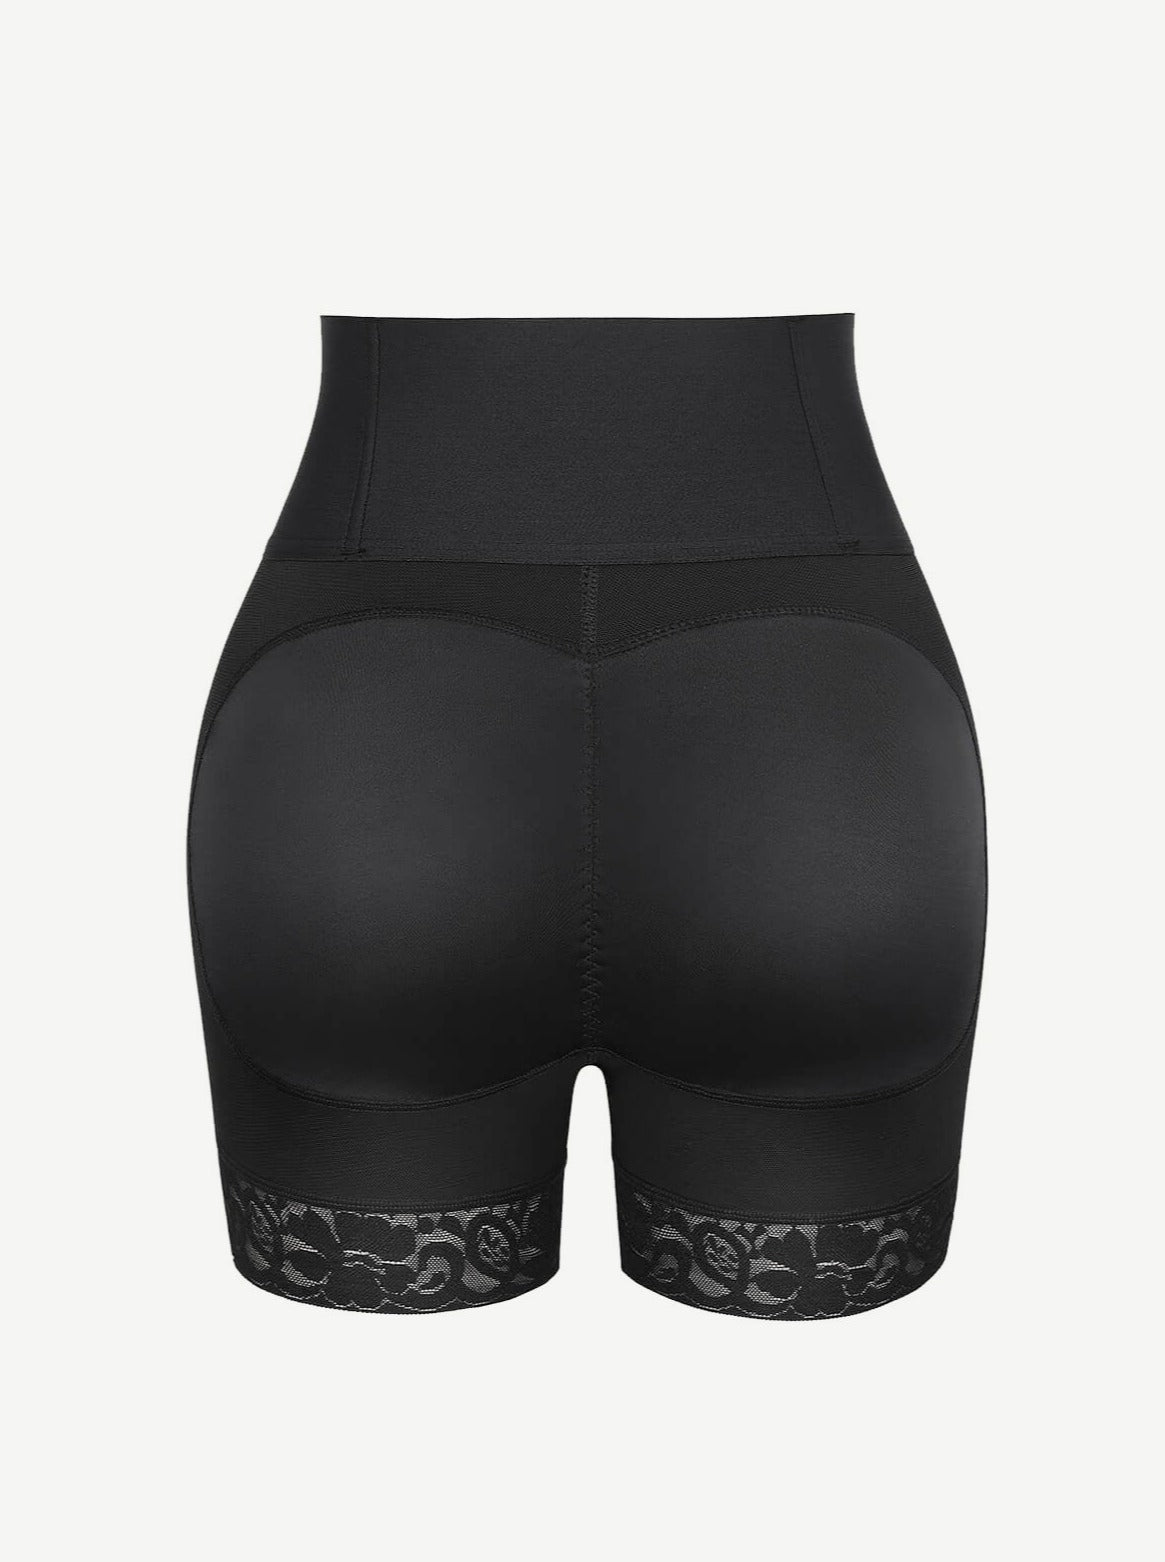 MRULIC 2021 New Trainer With Butt Lift, Adjustable Breathable Butt-Lifting  Open Bust Tummy Control Shapewear, Quickly Lift The And Tighten The Waist  Black + XL 